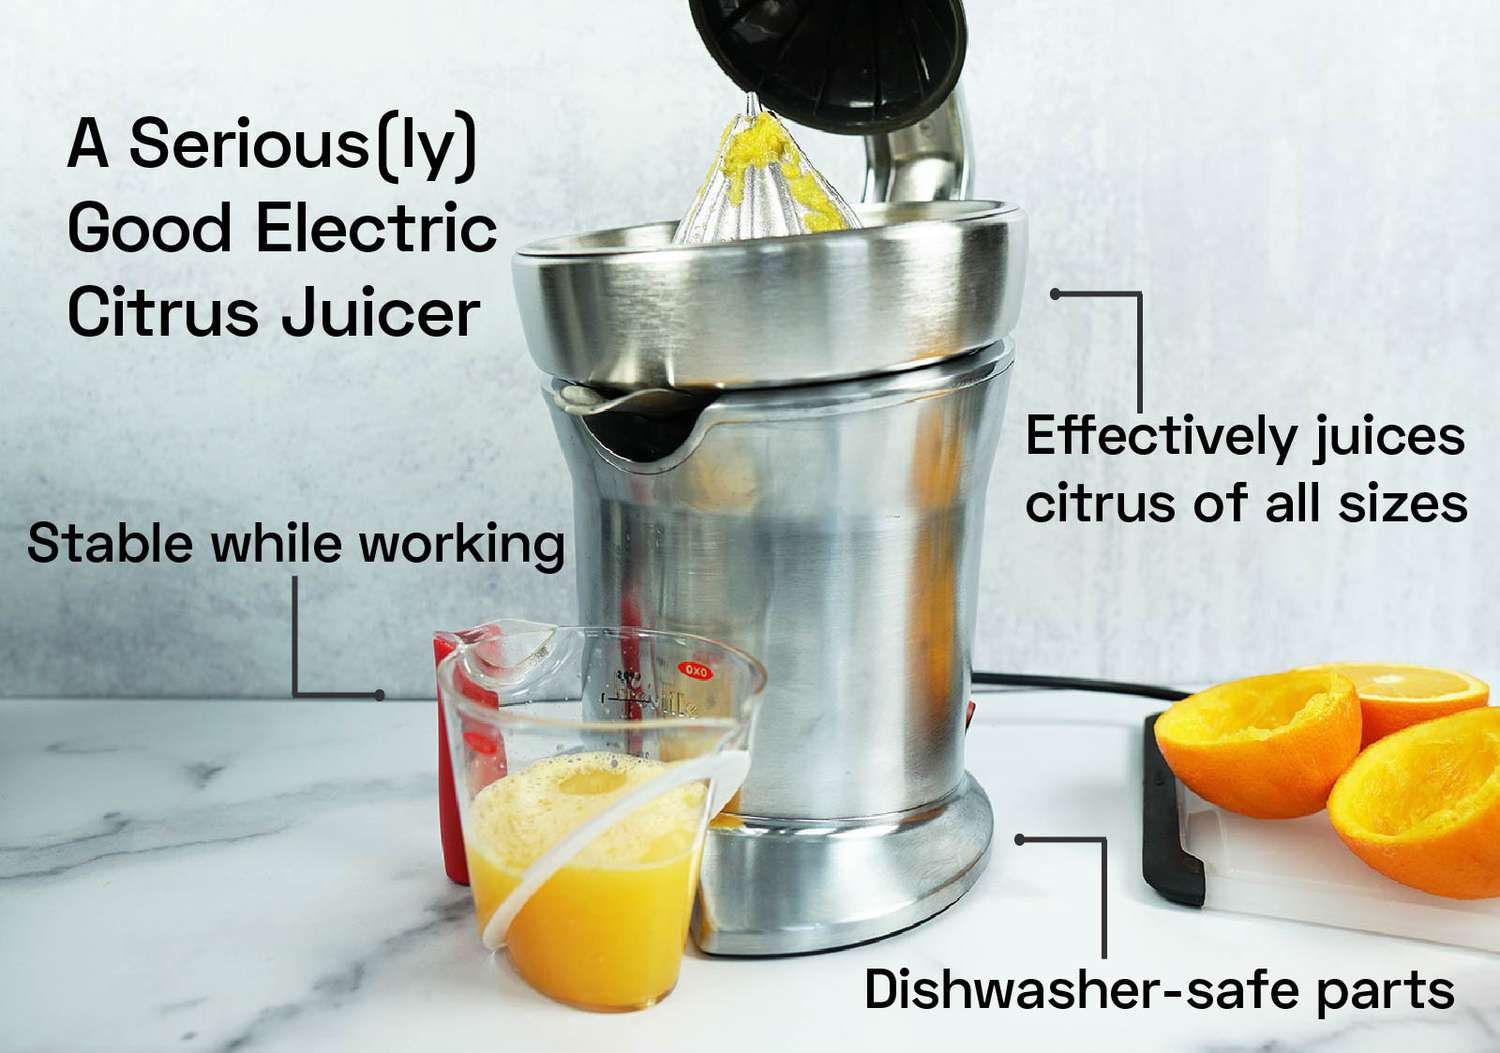 an electric citrus juicer with citrus pulp on its reamer and a cup of orange juice below it